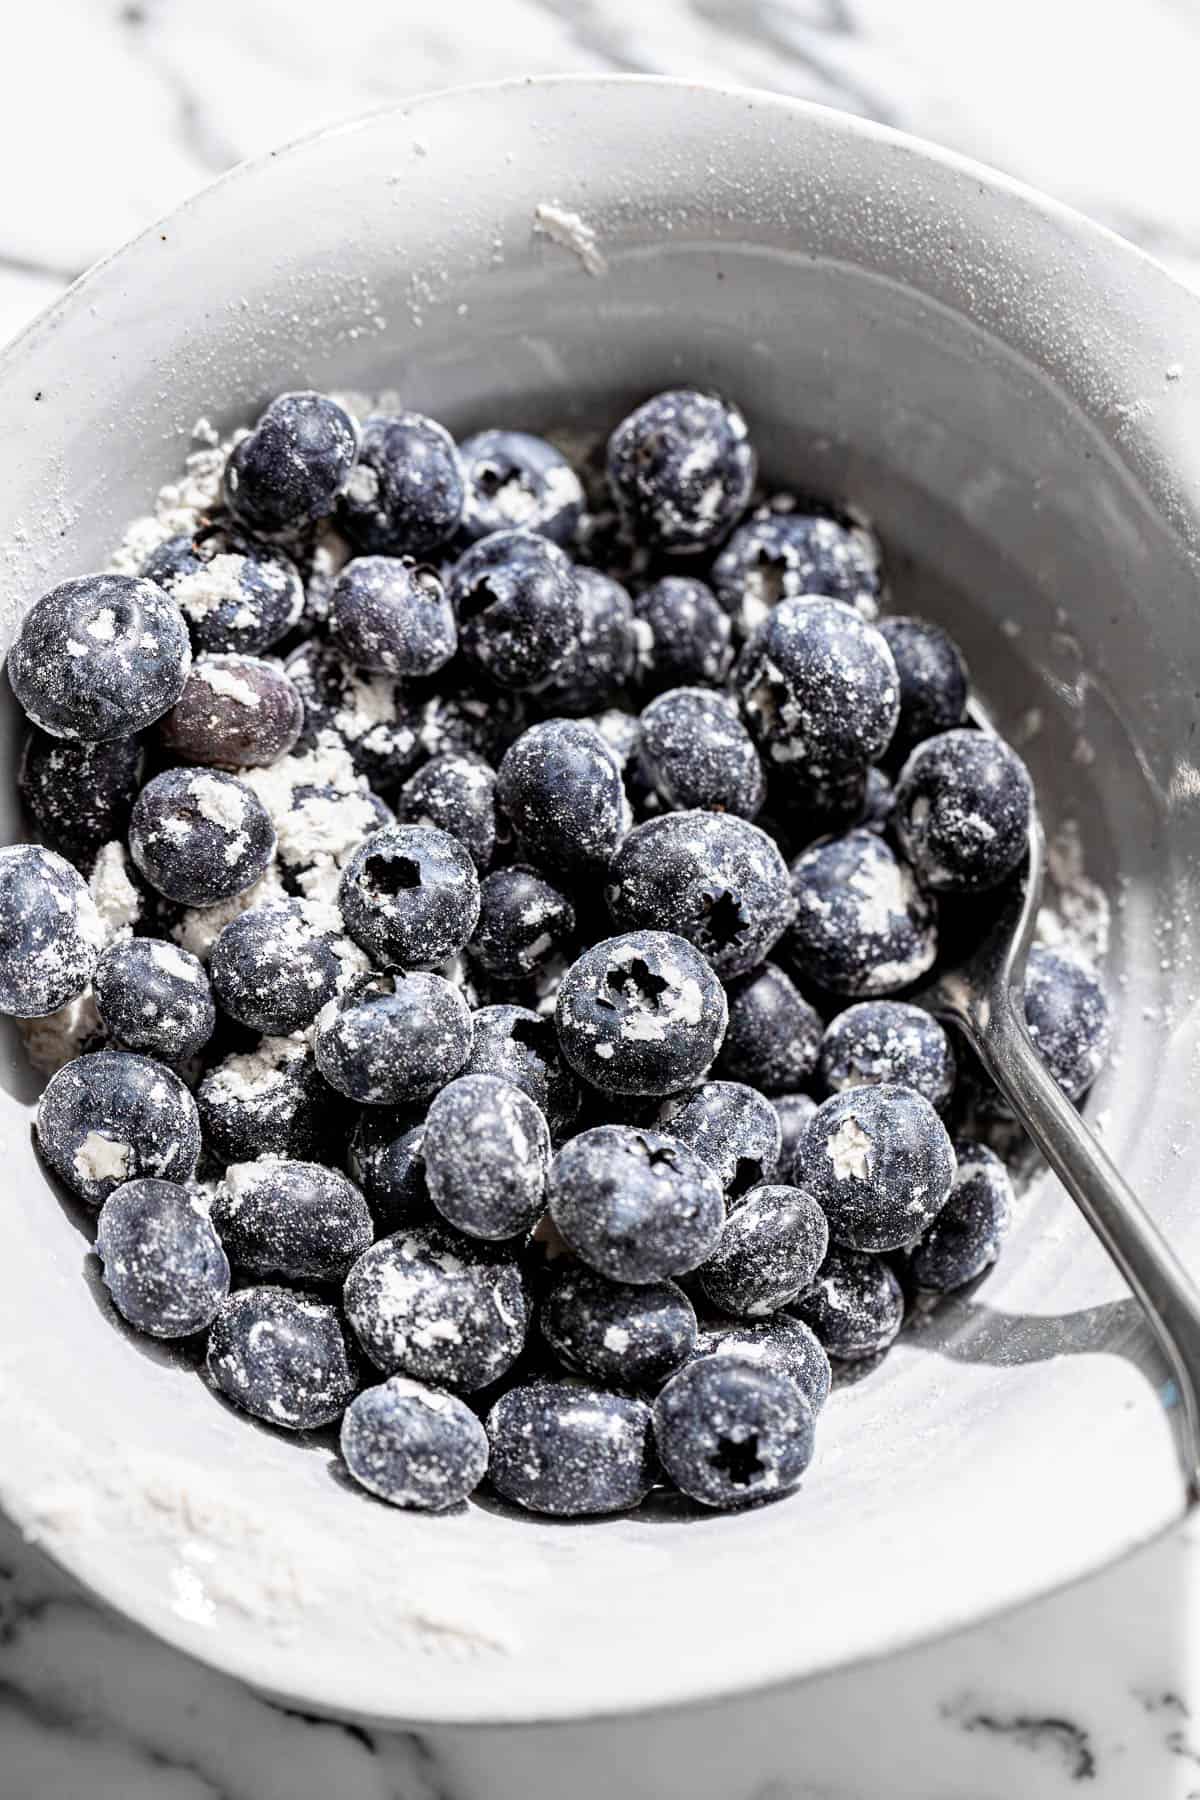 blueberries coated in flour in bowl.